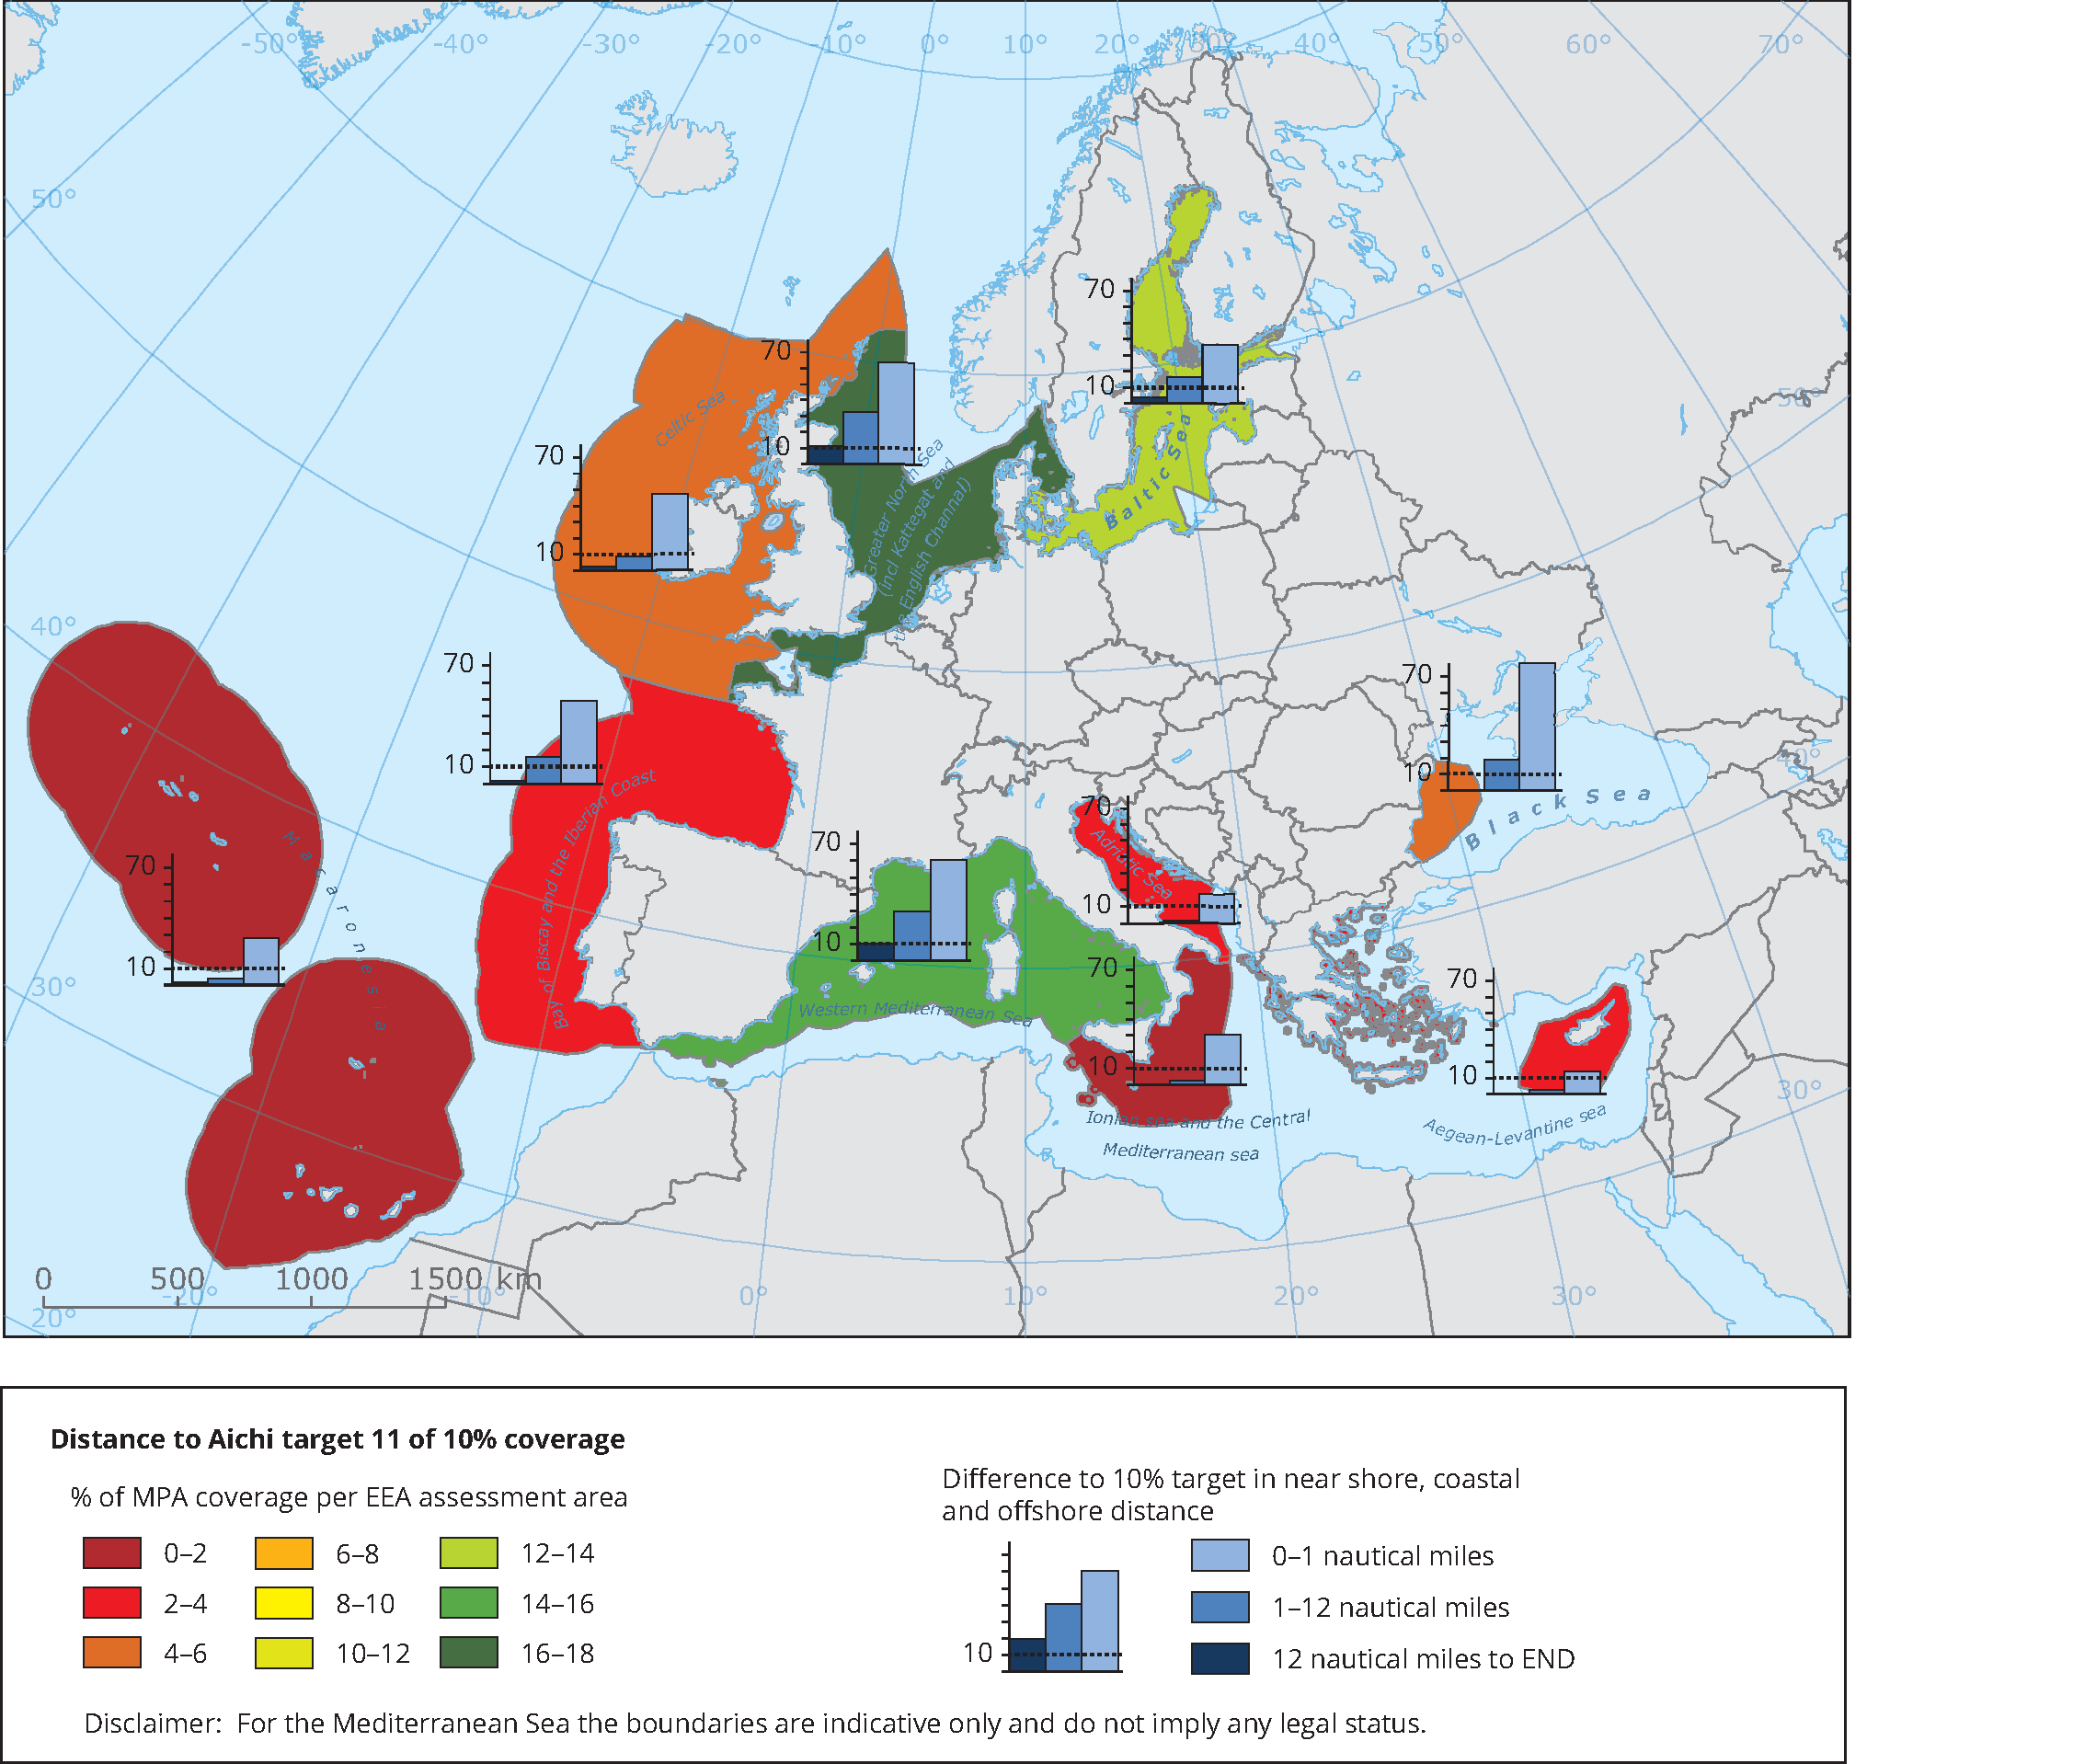 Marine protected area coverage by regional sea 